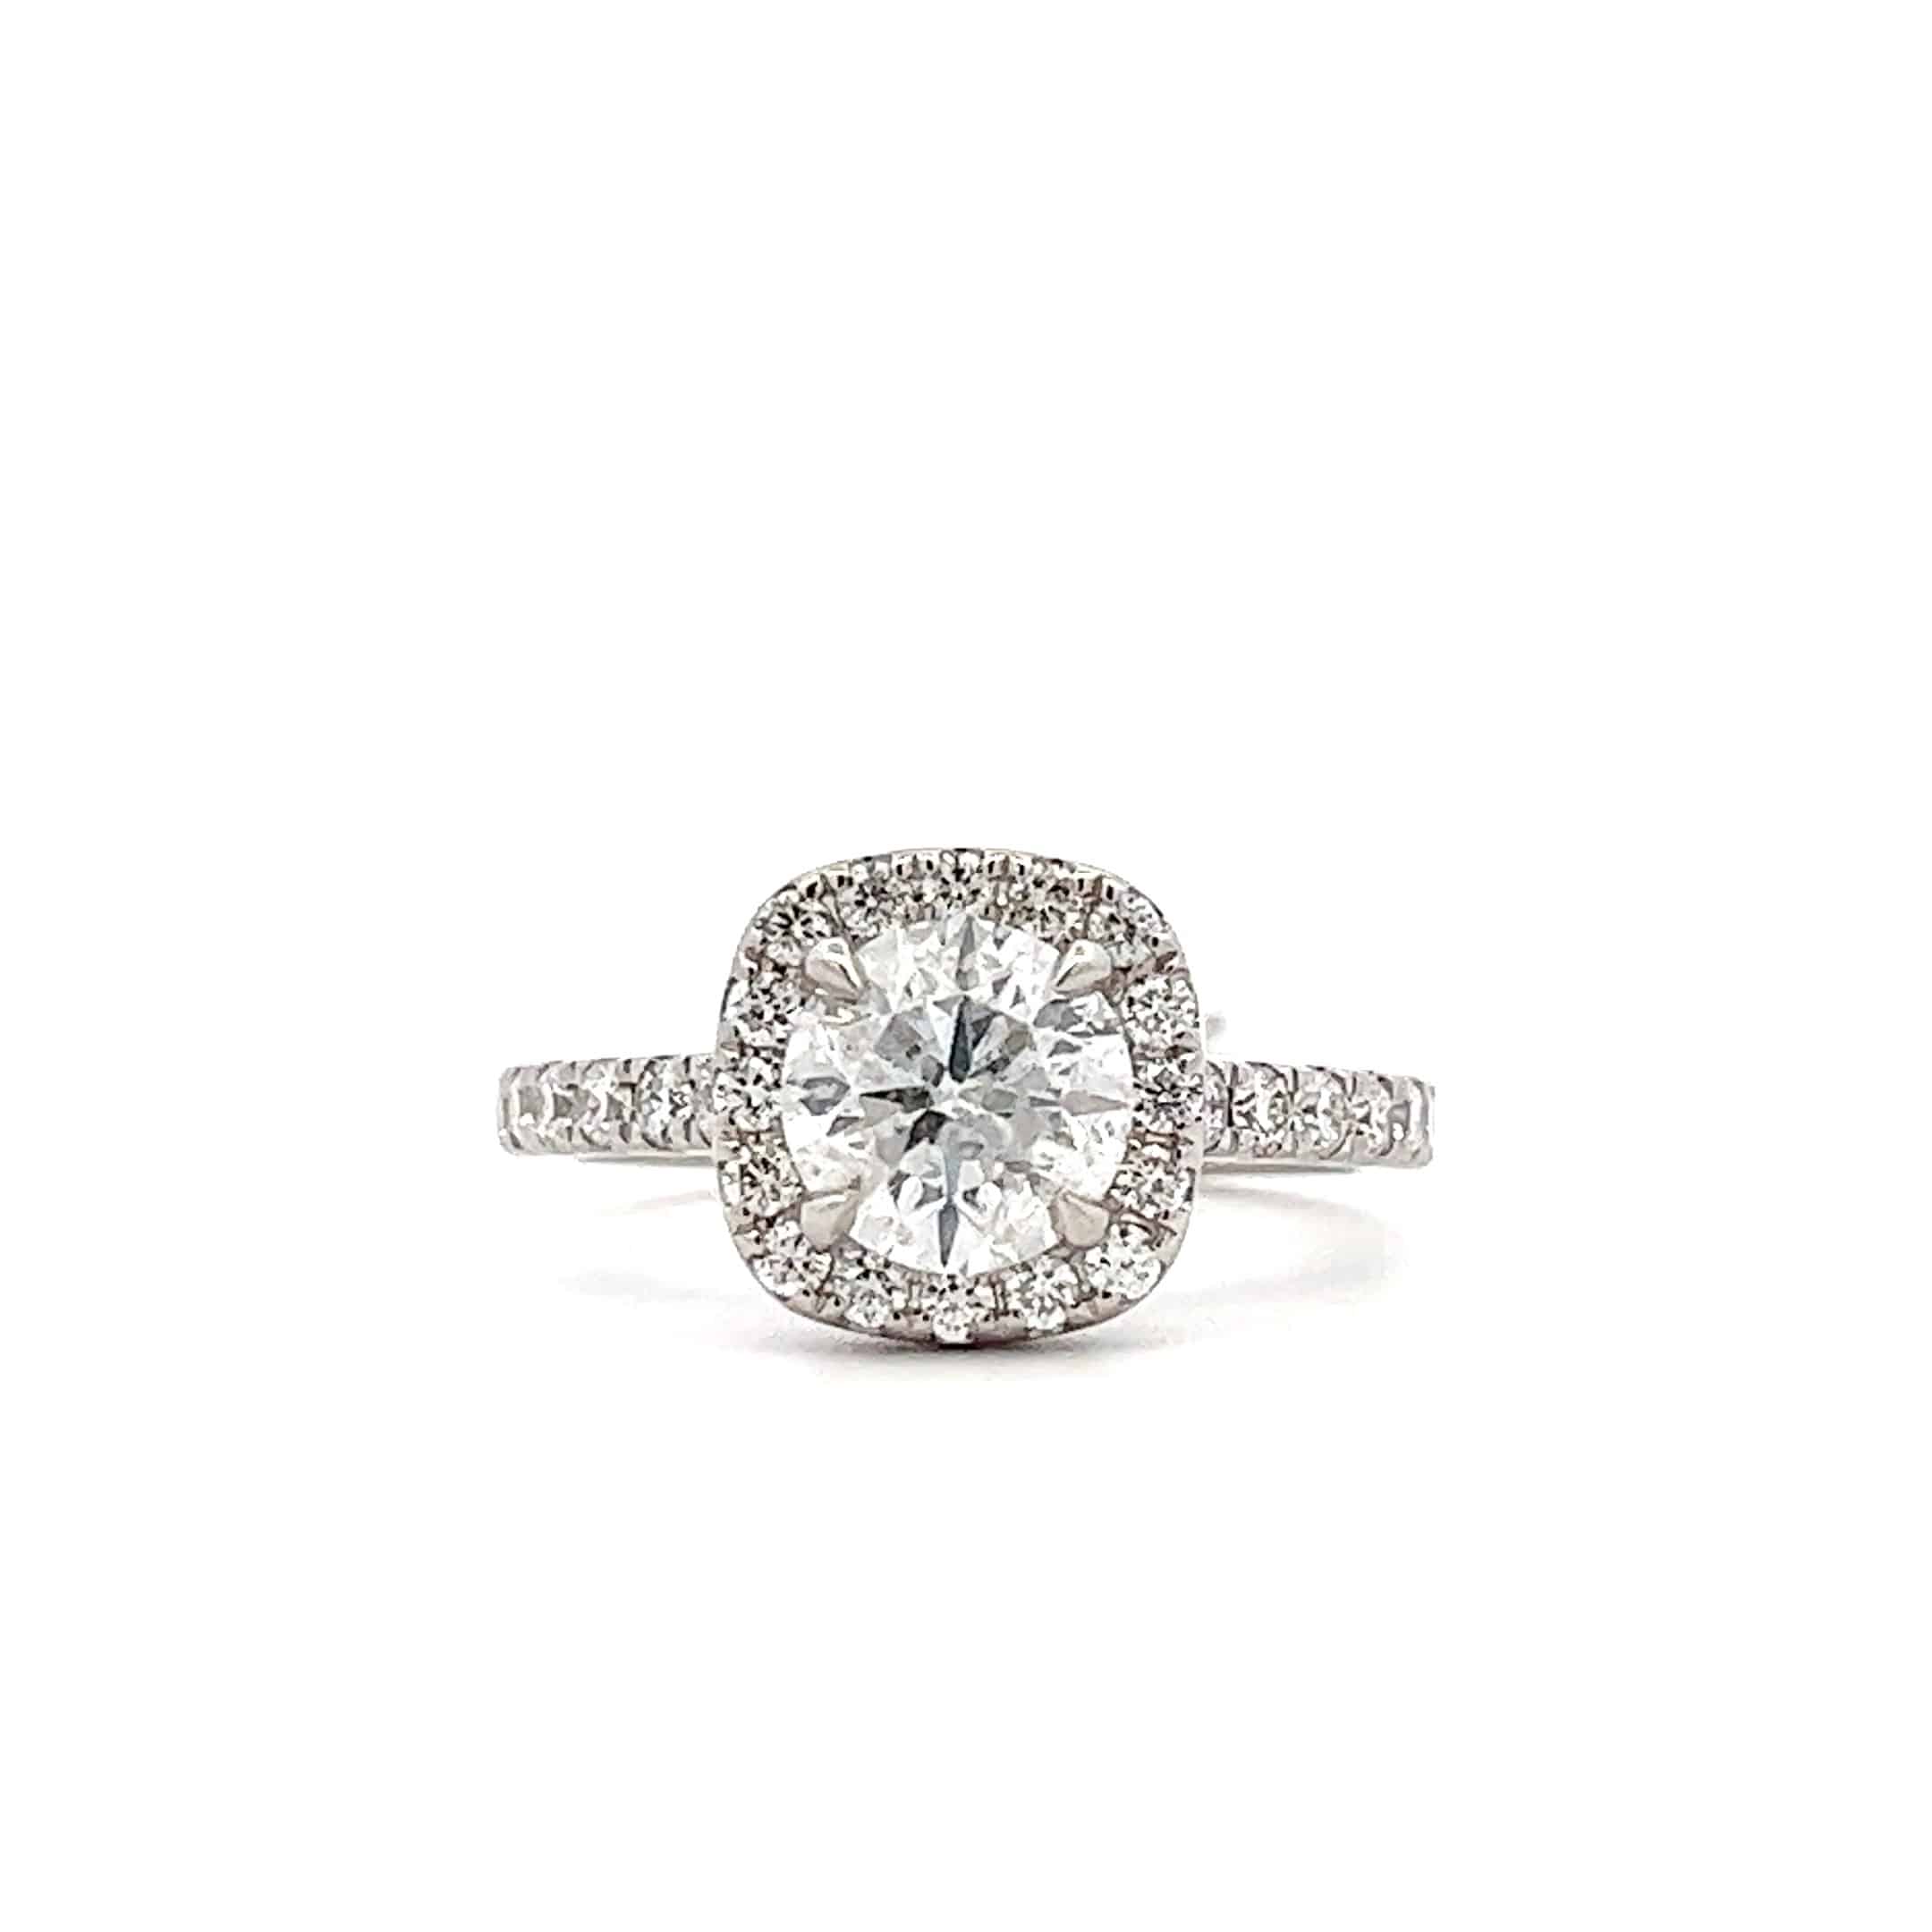 1.61ct Brilliant Cut Diamond Set in Platinum Cushion Shaped Halo Design Ring – 2.33ct Total Weight